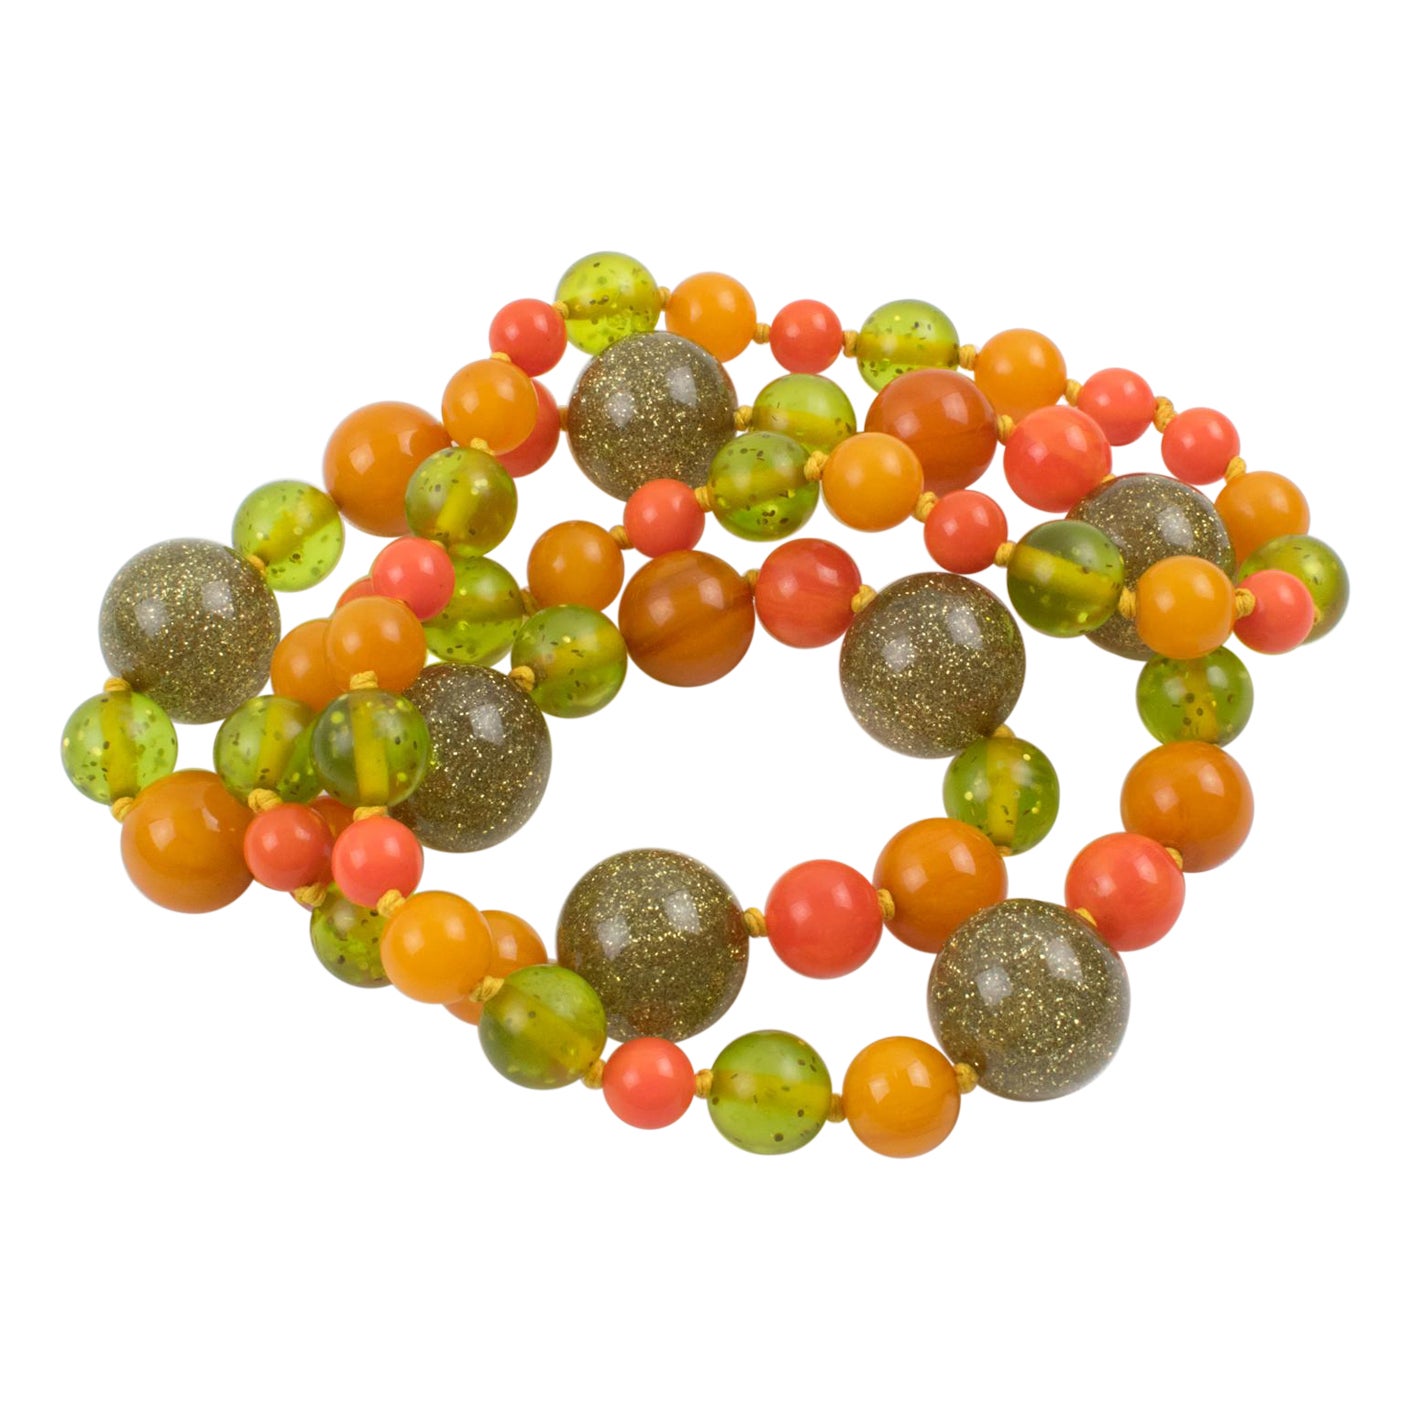 Bakelite and Lucite Extra Long Necklace with Orange, Green and Glitter Beads For Sale